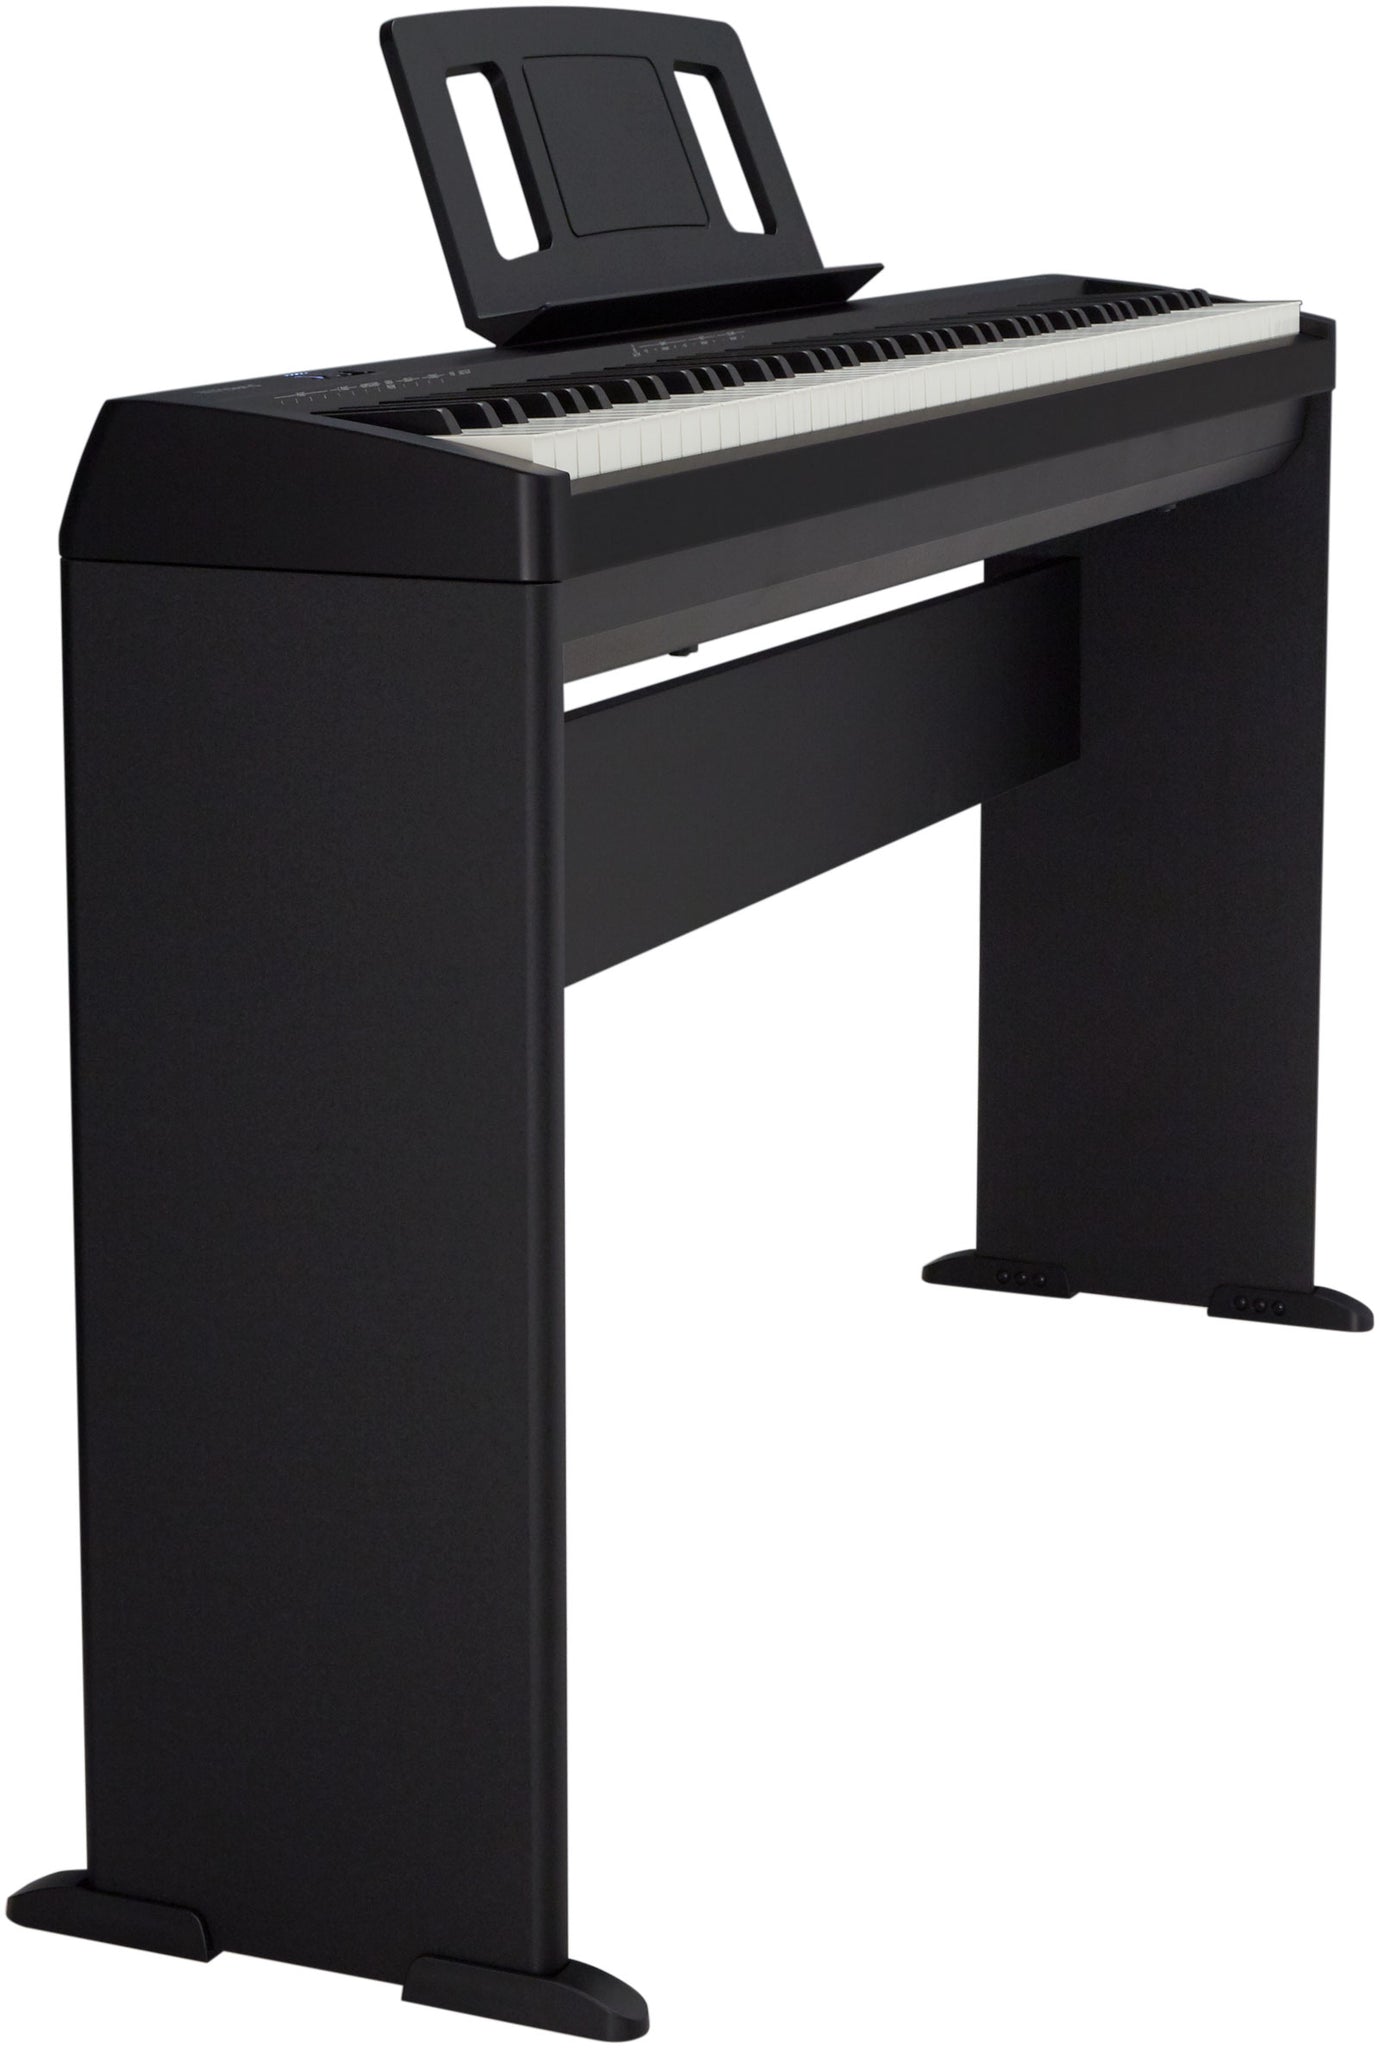 Roland Black with stand –